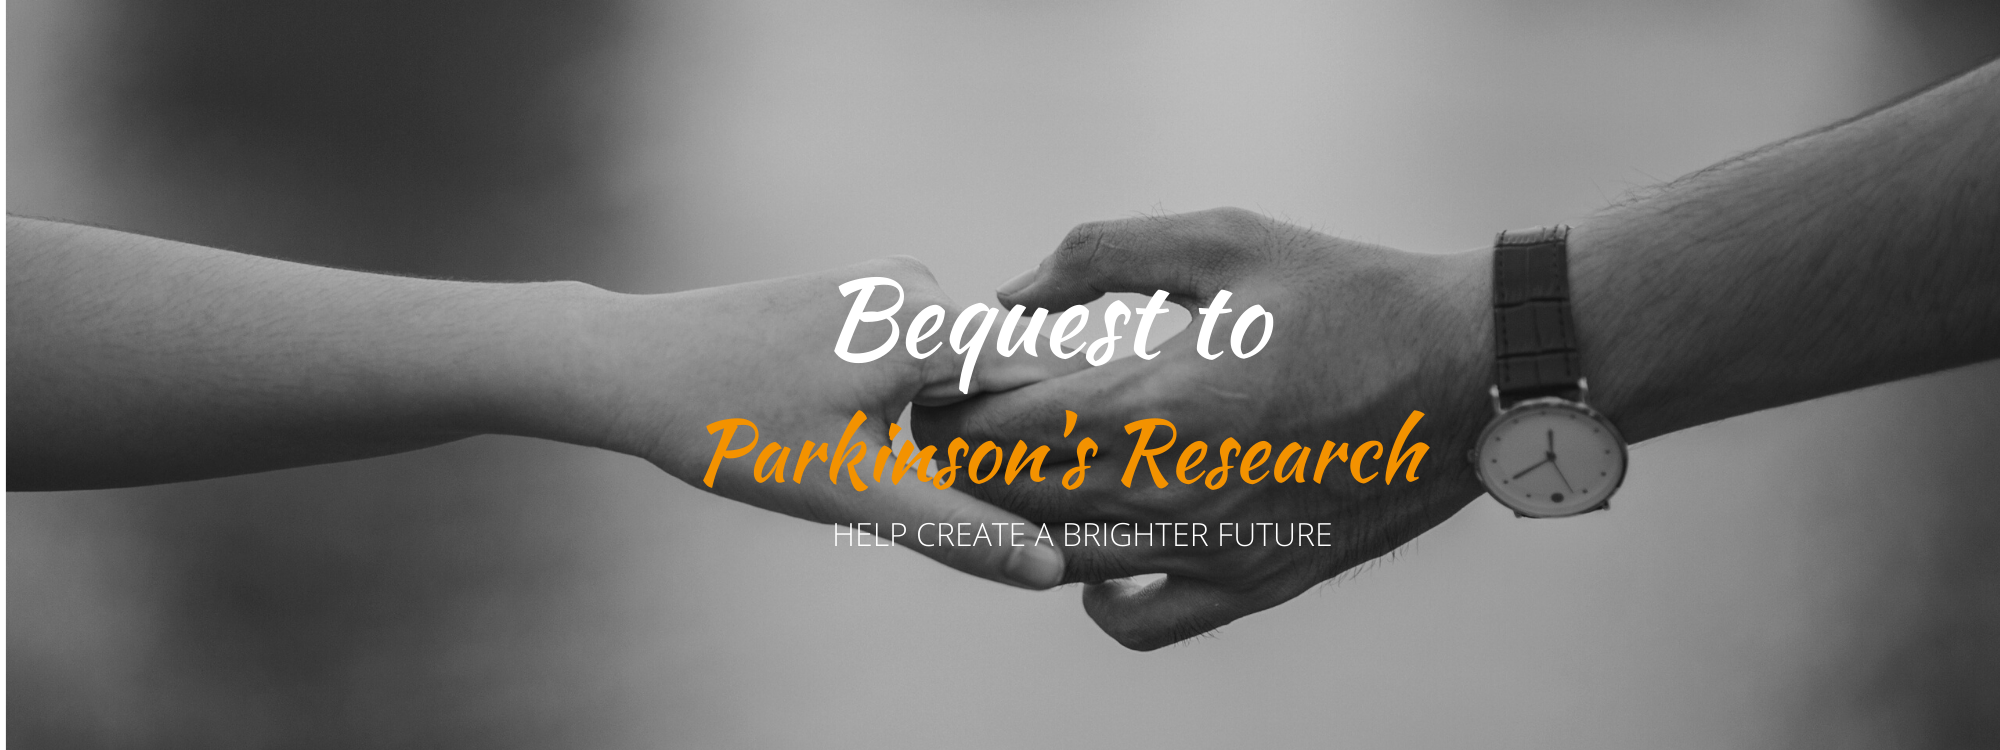 Leave a Bequest to Parkinson's Research